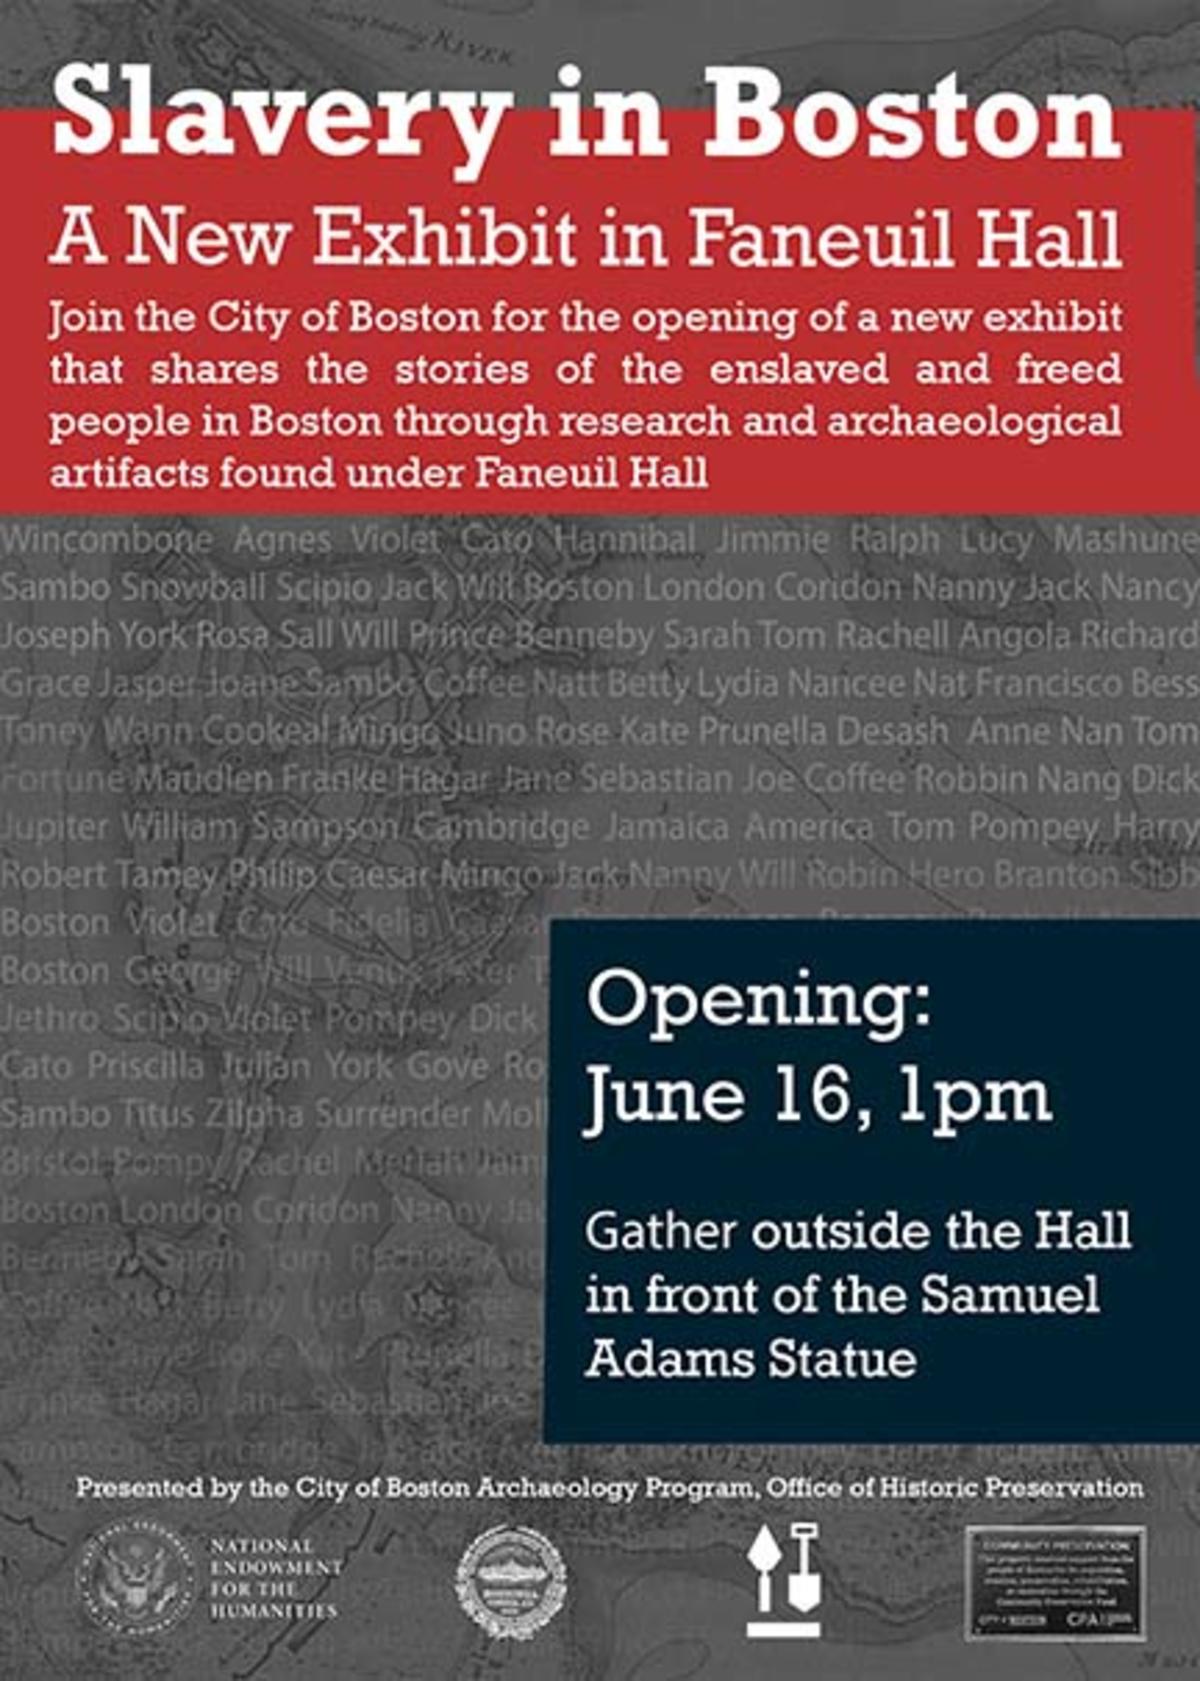 A flyer with event details for the opening of the Slavery in Boston exhibit at Faneuil Hall on June 16, 2023 at 1 PM.